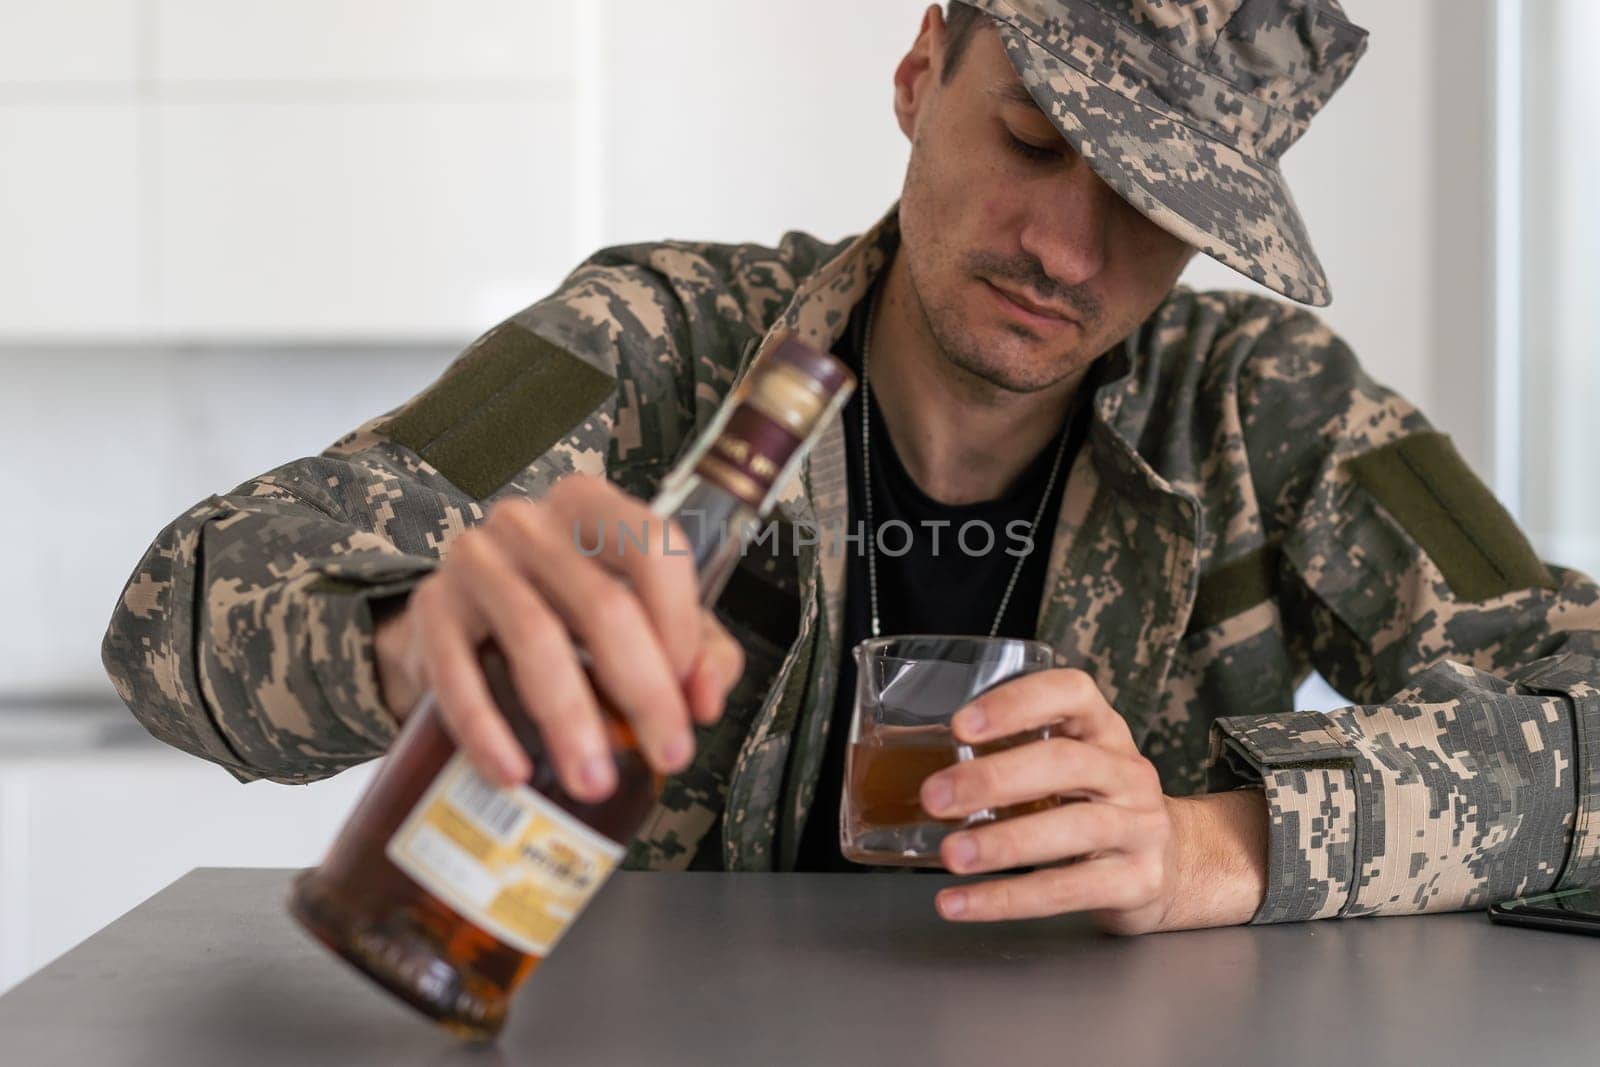 one man sit at home with bottle of liquor drink whiskey drunk alcoholic Alcohol abuse, addiction and man depression concept drink and drive copy space hold car keys. High quality photo